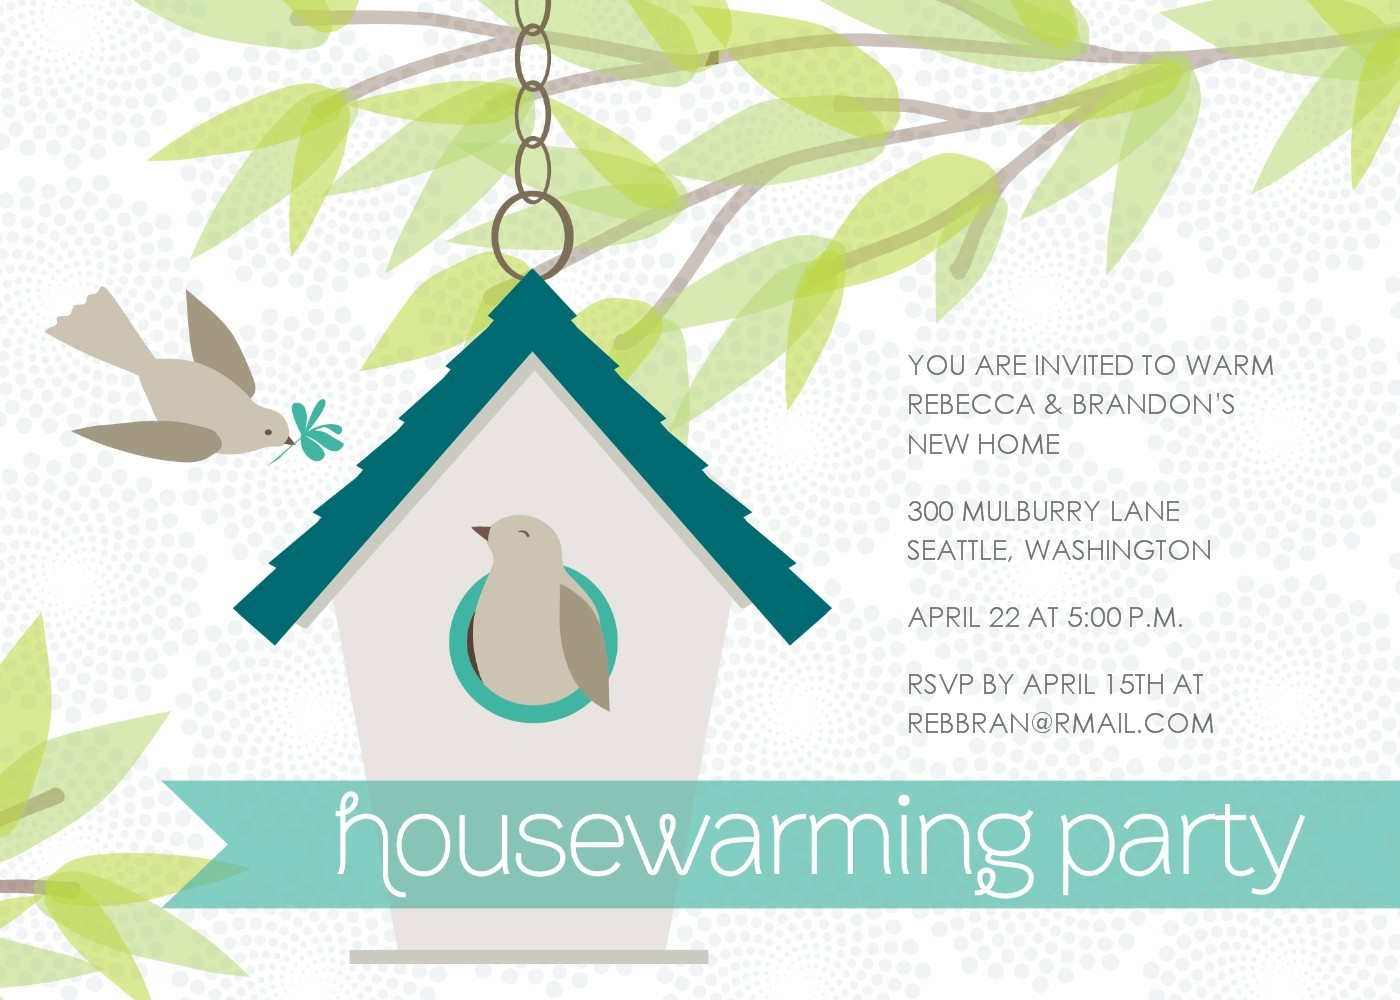 Free Printable Housewarming Invitations Cards - Joomlaexploit - Free Printable Housewarming Invitations Cards